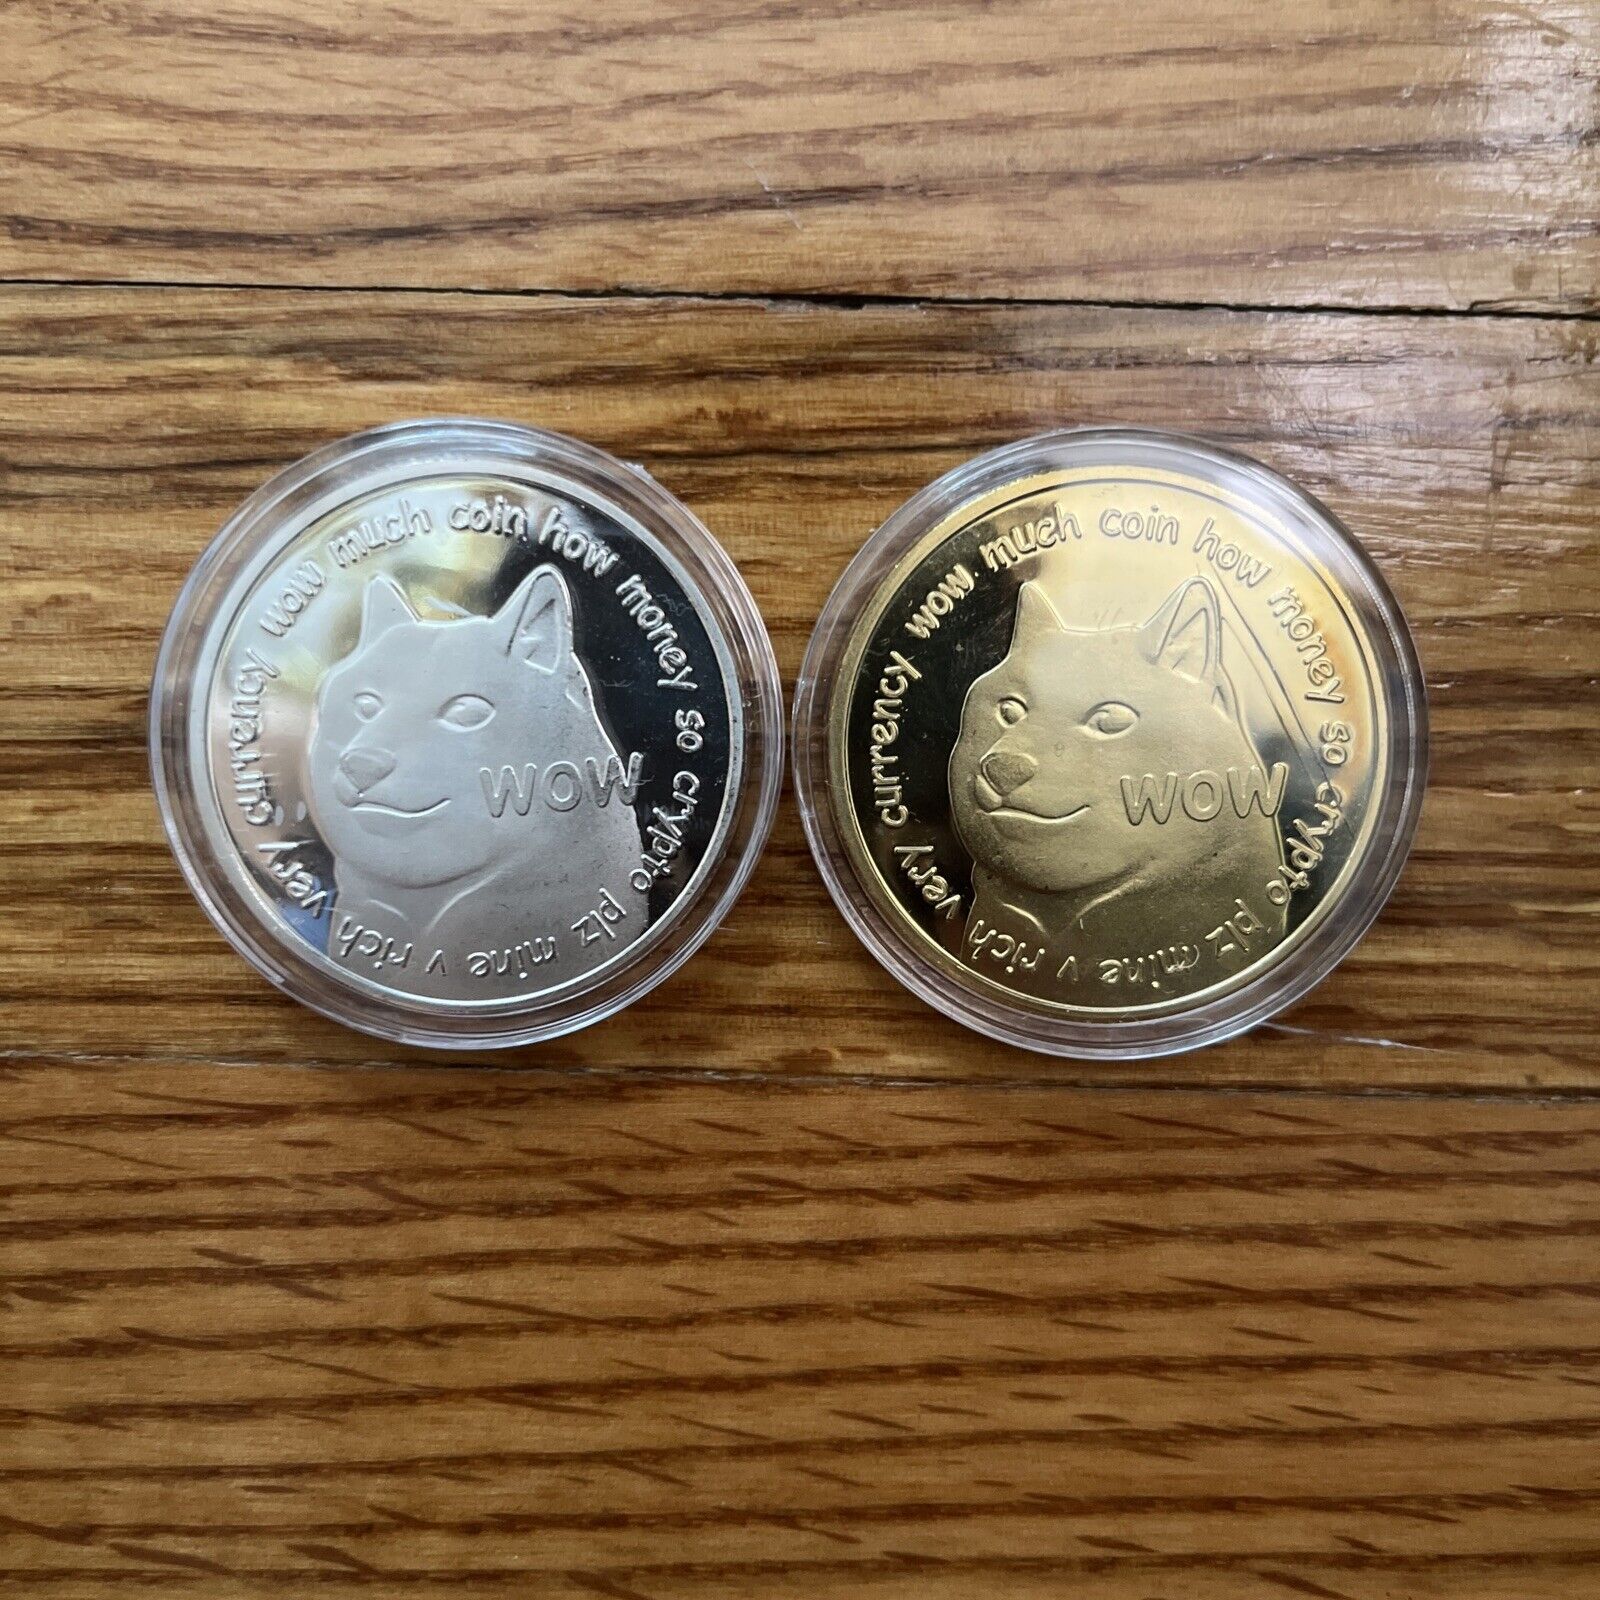 Doge Coin Wow Silver And Gold Coin 